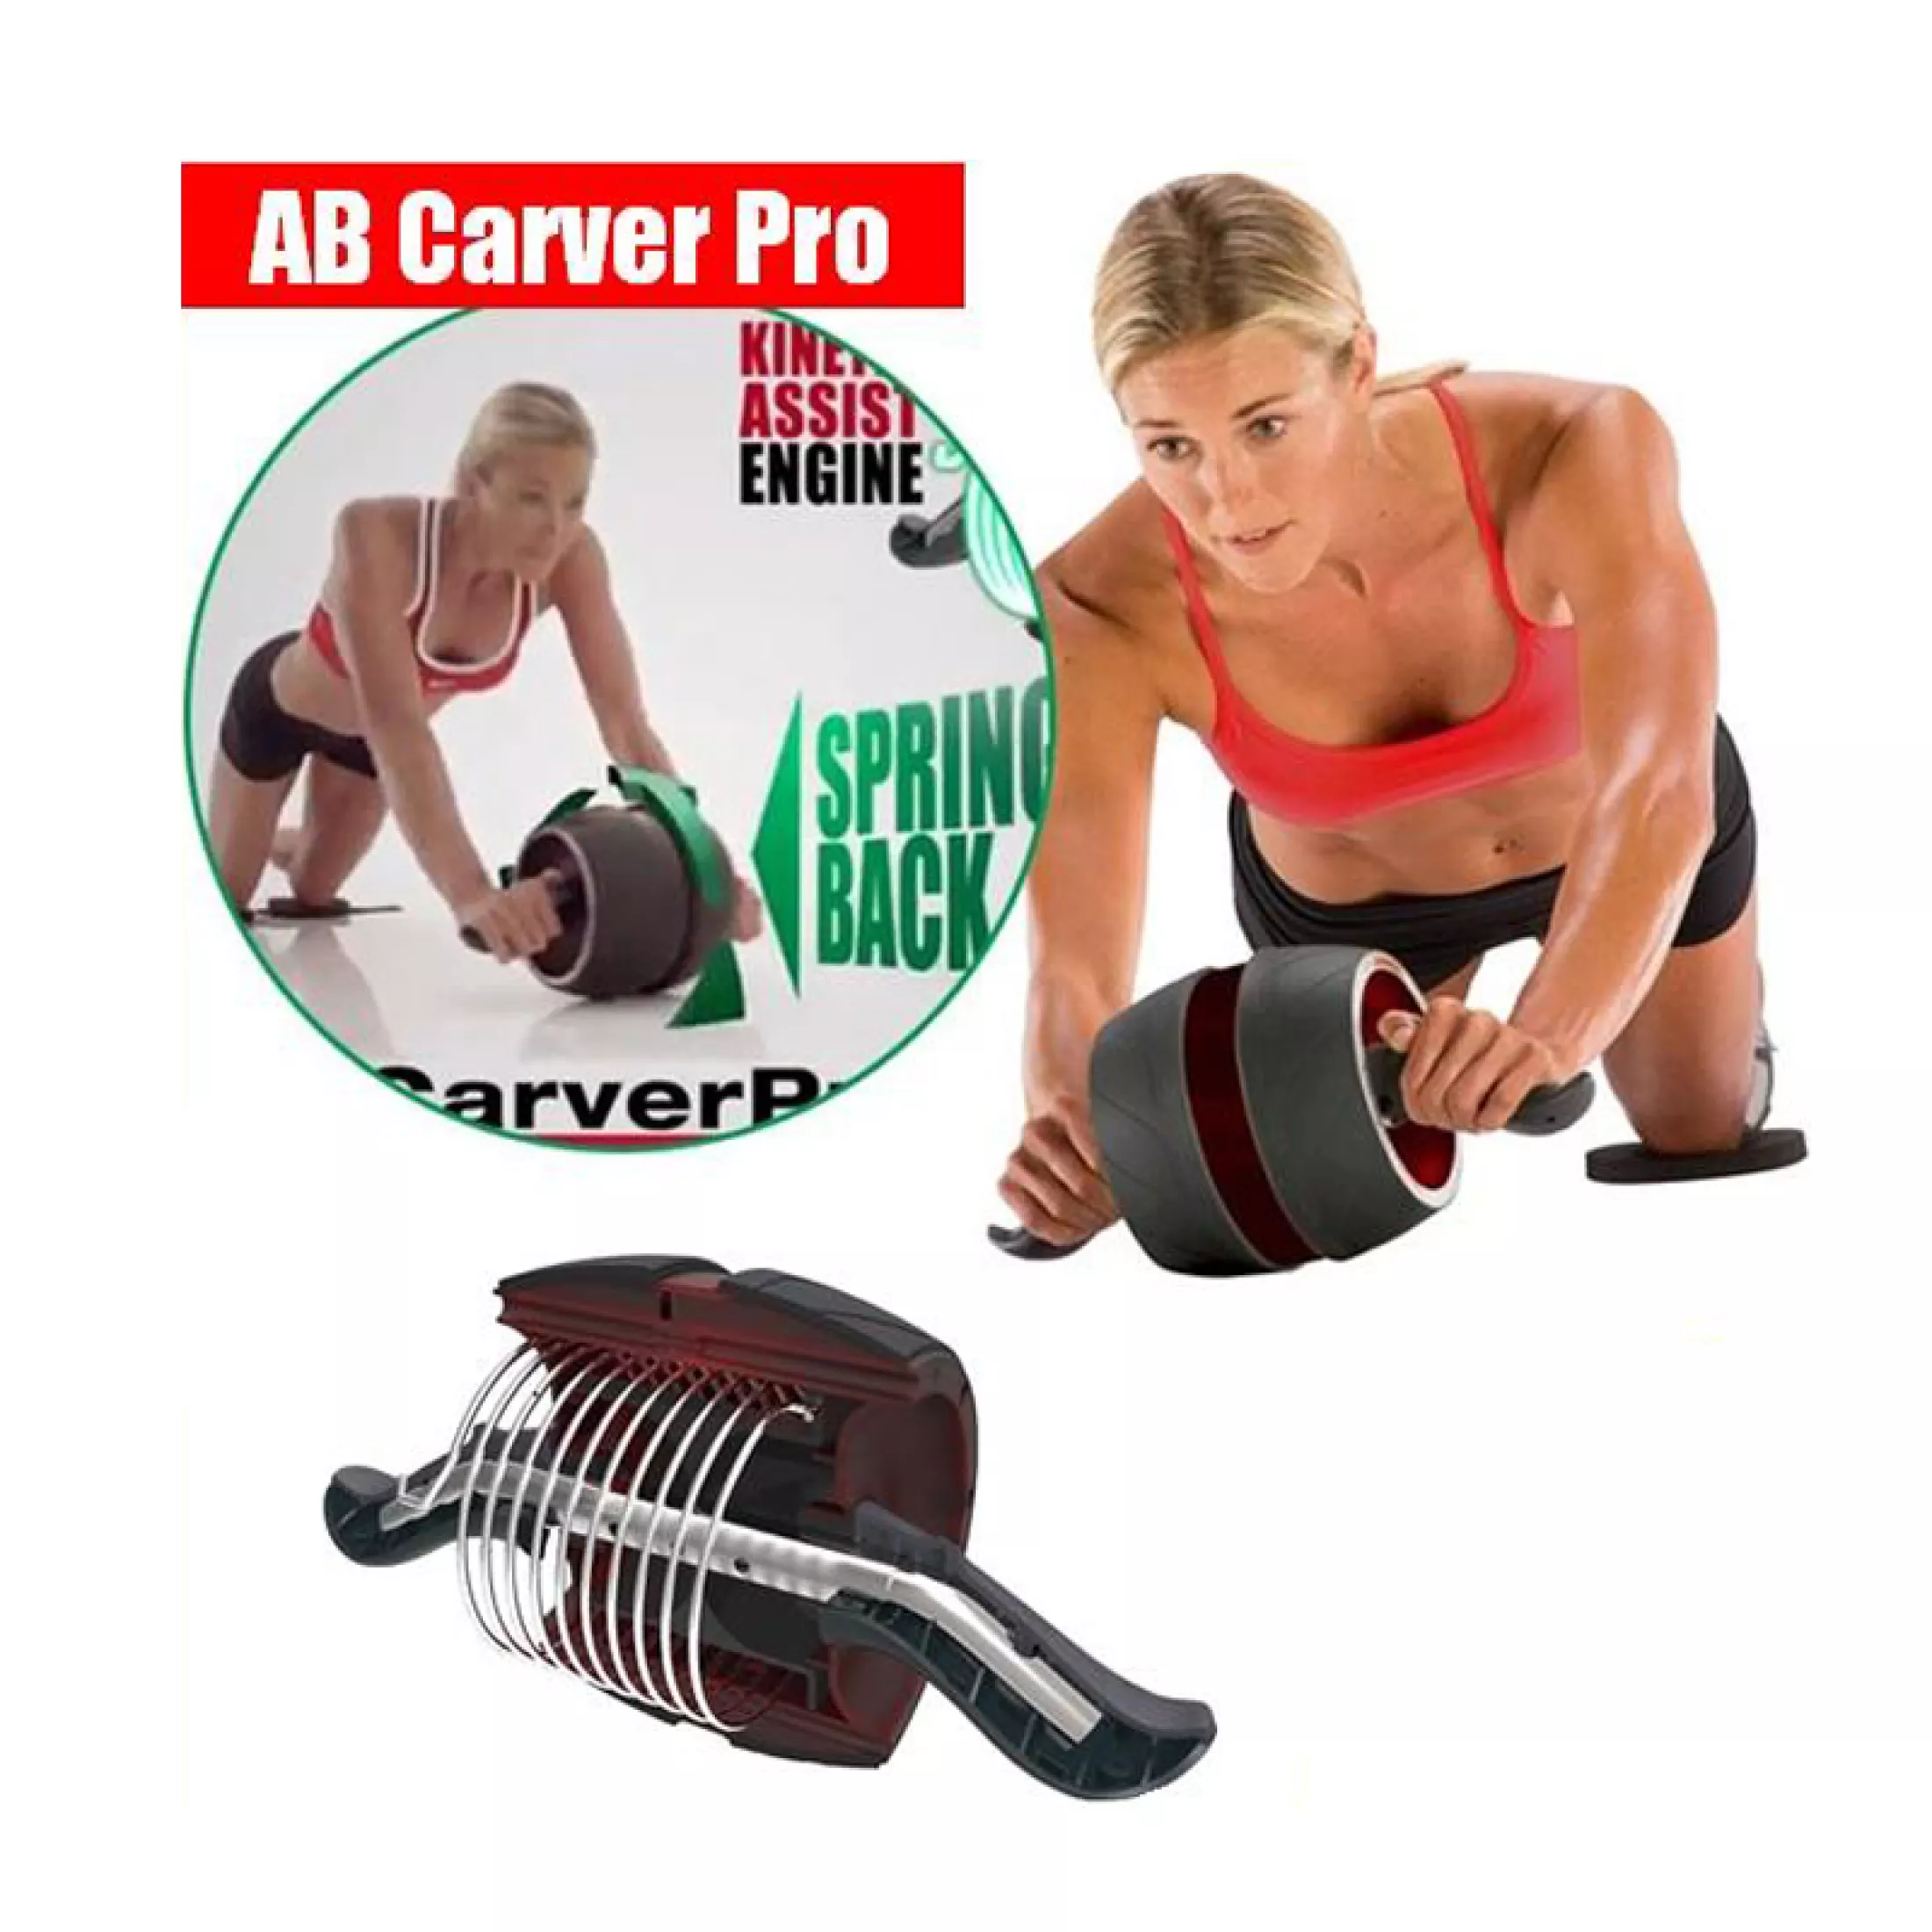 Perfect ab carver prom exercise device Perfect ab carver prom exercise device Fitness and slimming